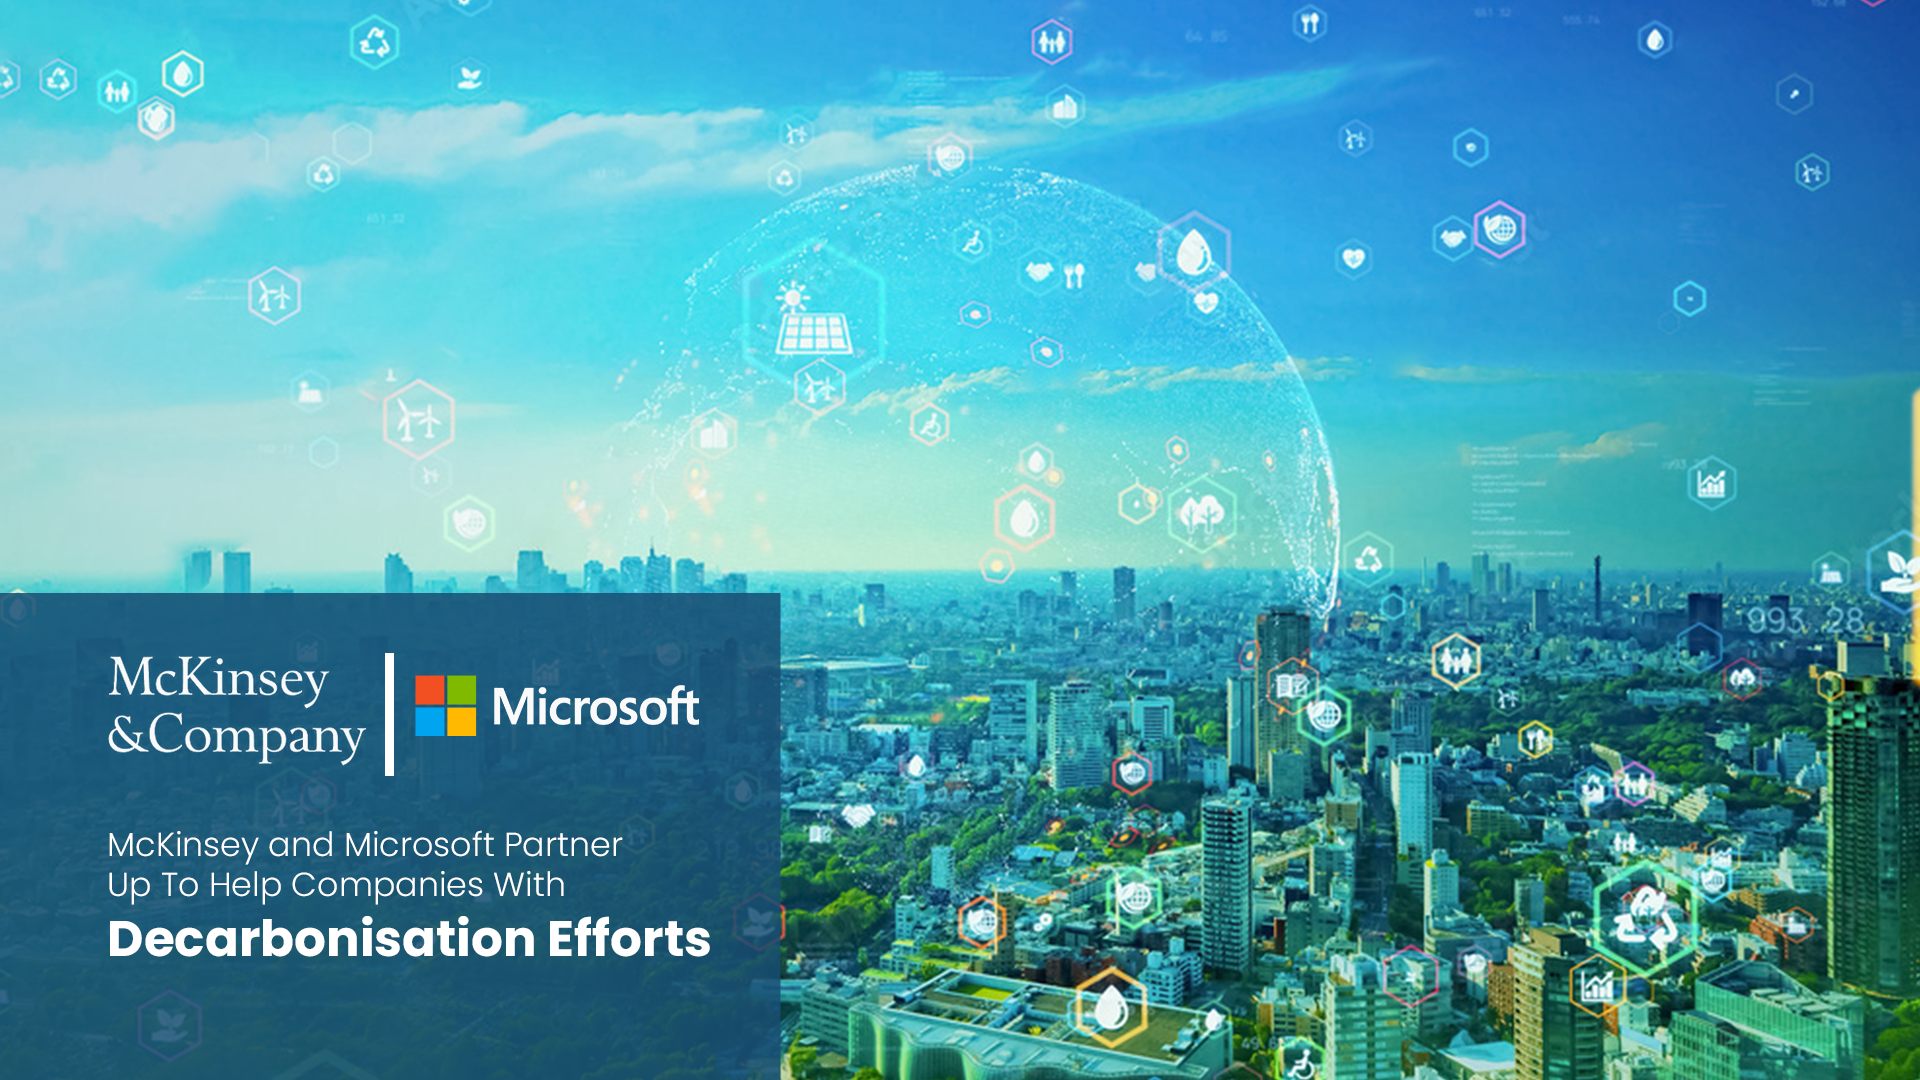 McKinsey and Microsoft Partner Up To Help Companies With Decarbonisation Efforts.